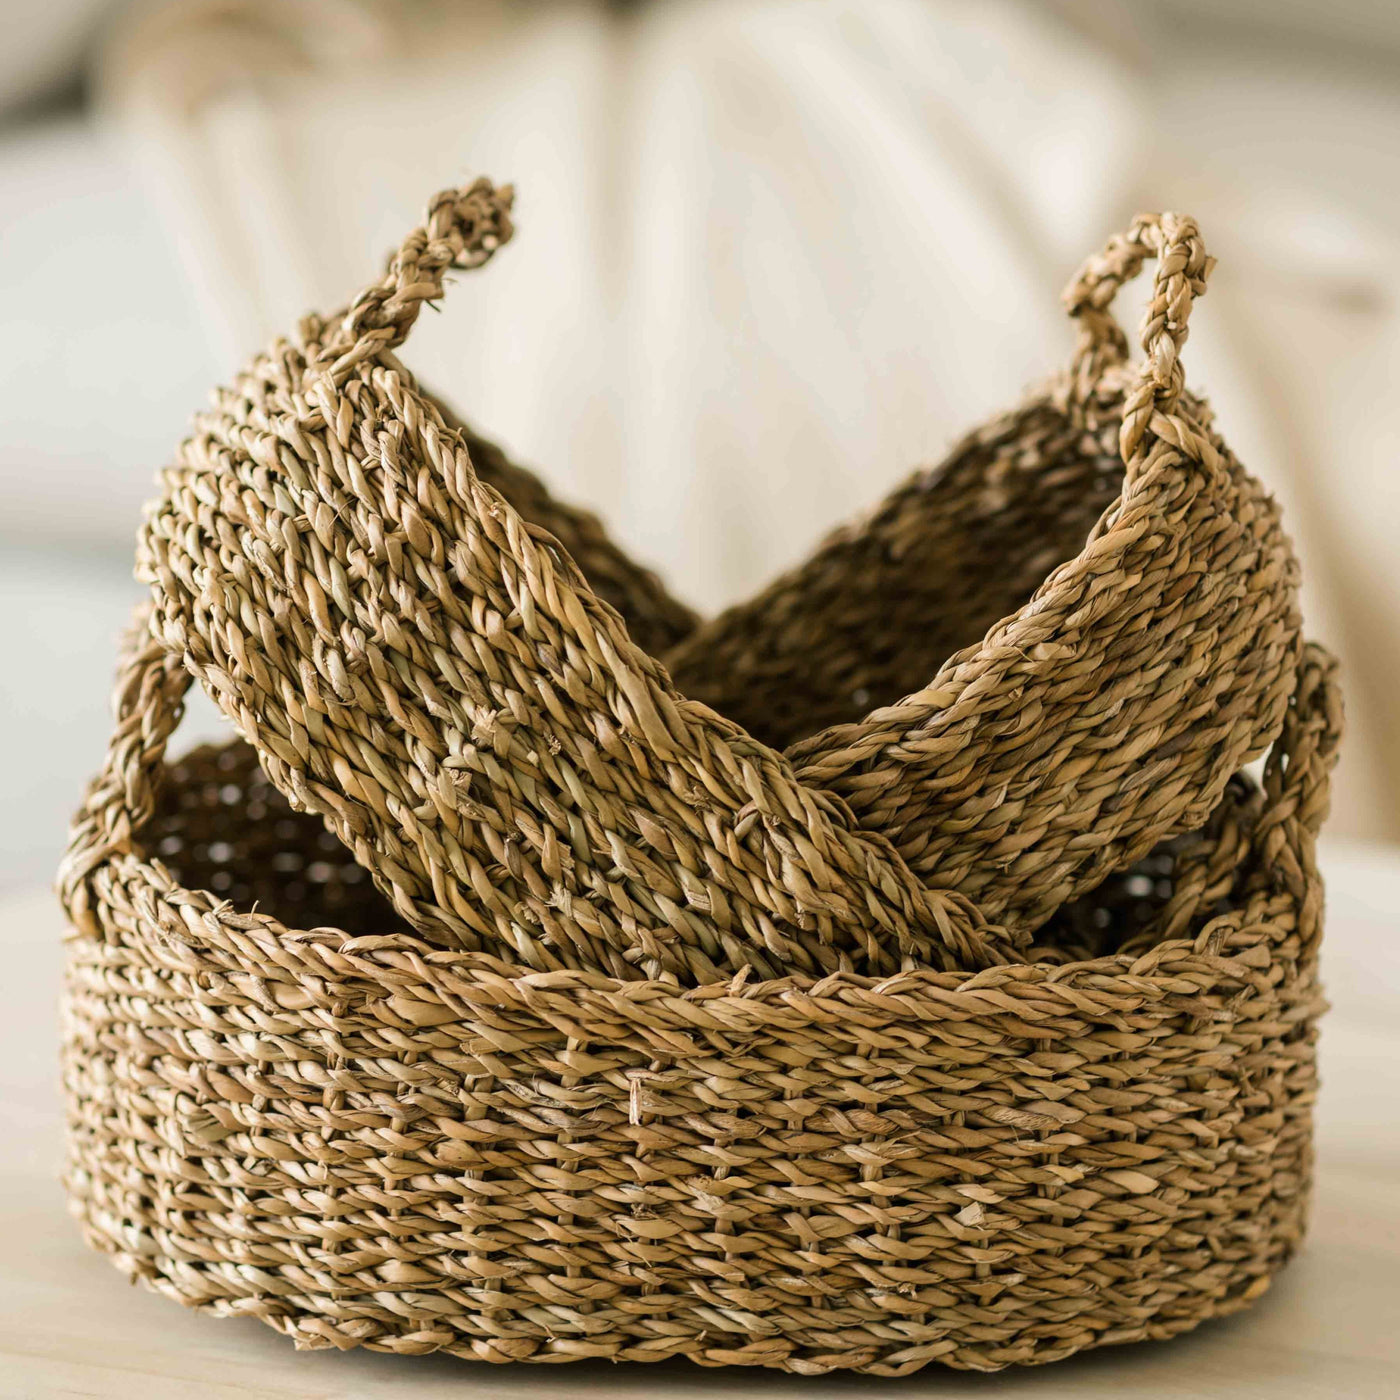 Oval Handwoven Baskets | 3 Sizes